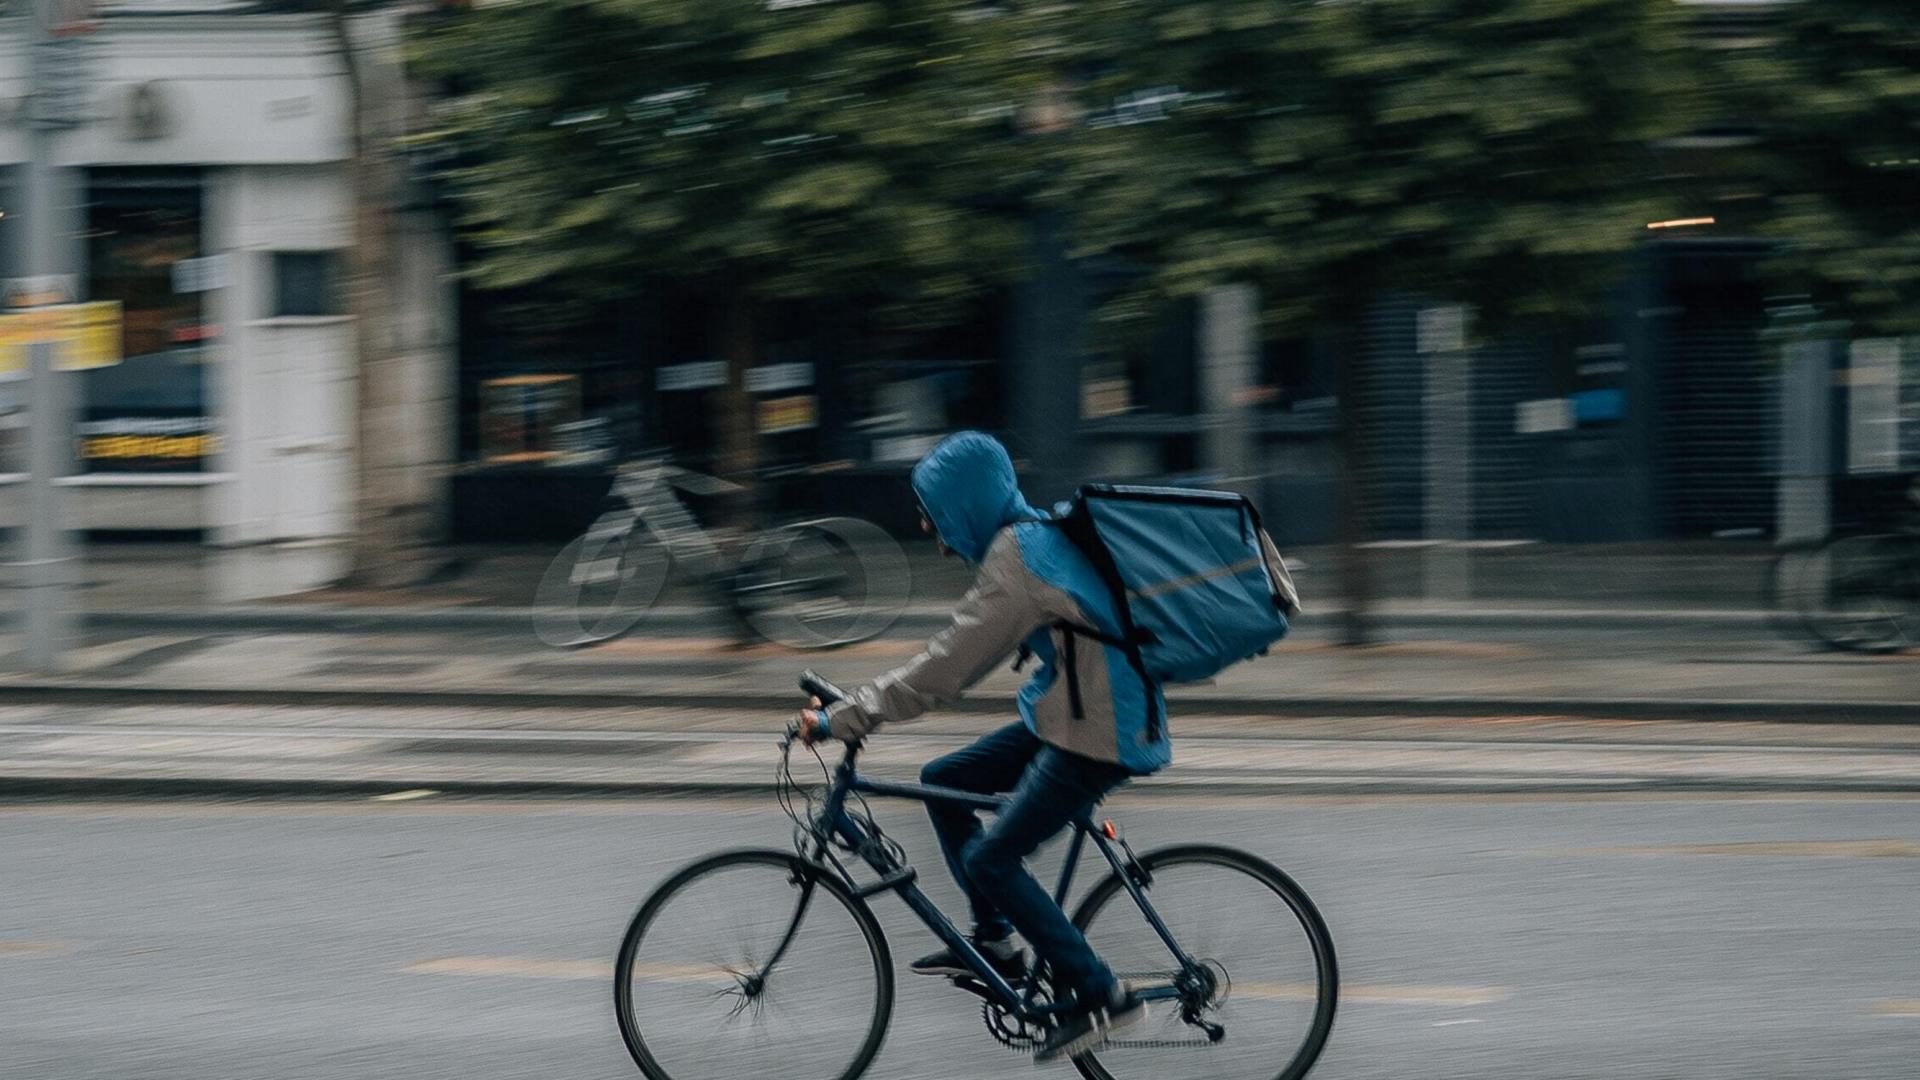 An image of a food delivery driver on a bicycle